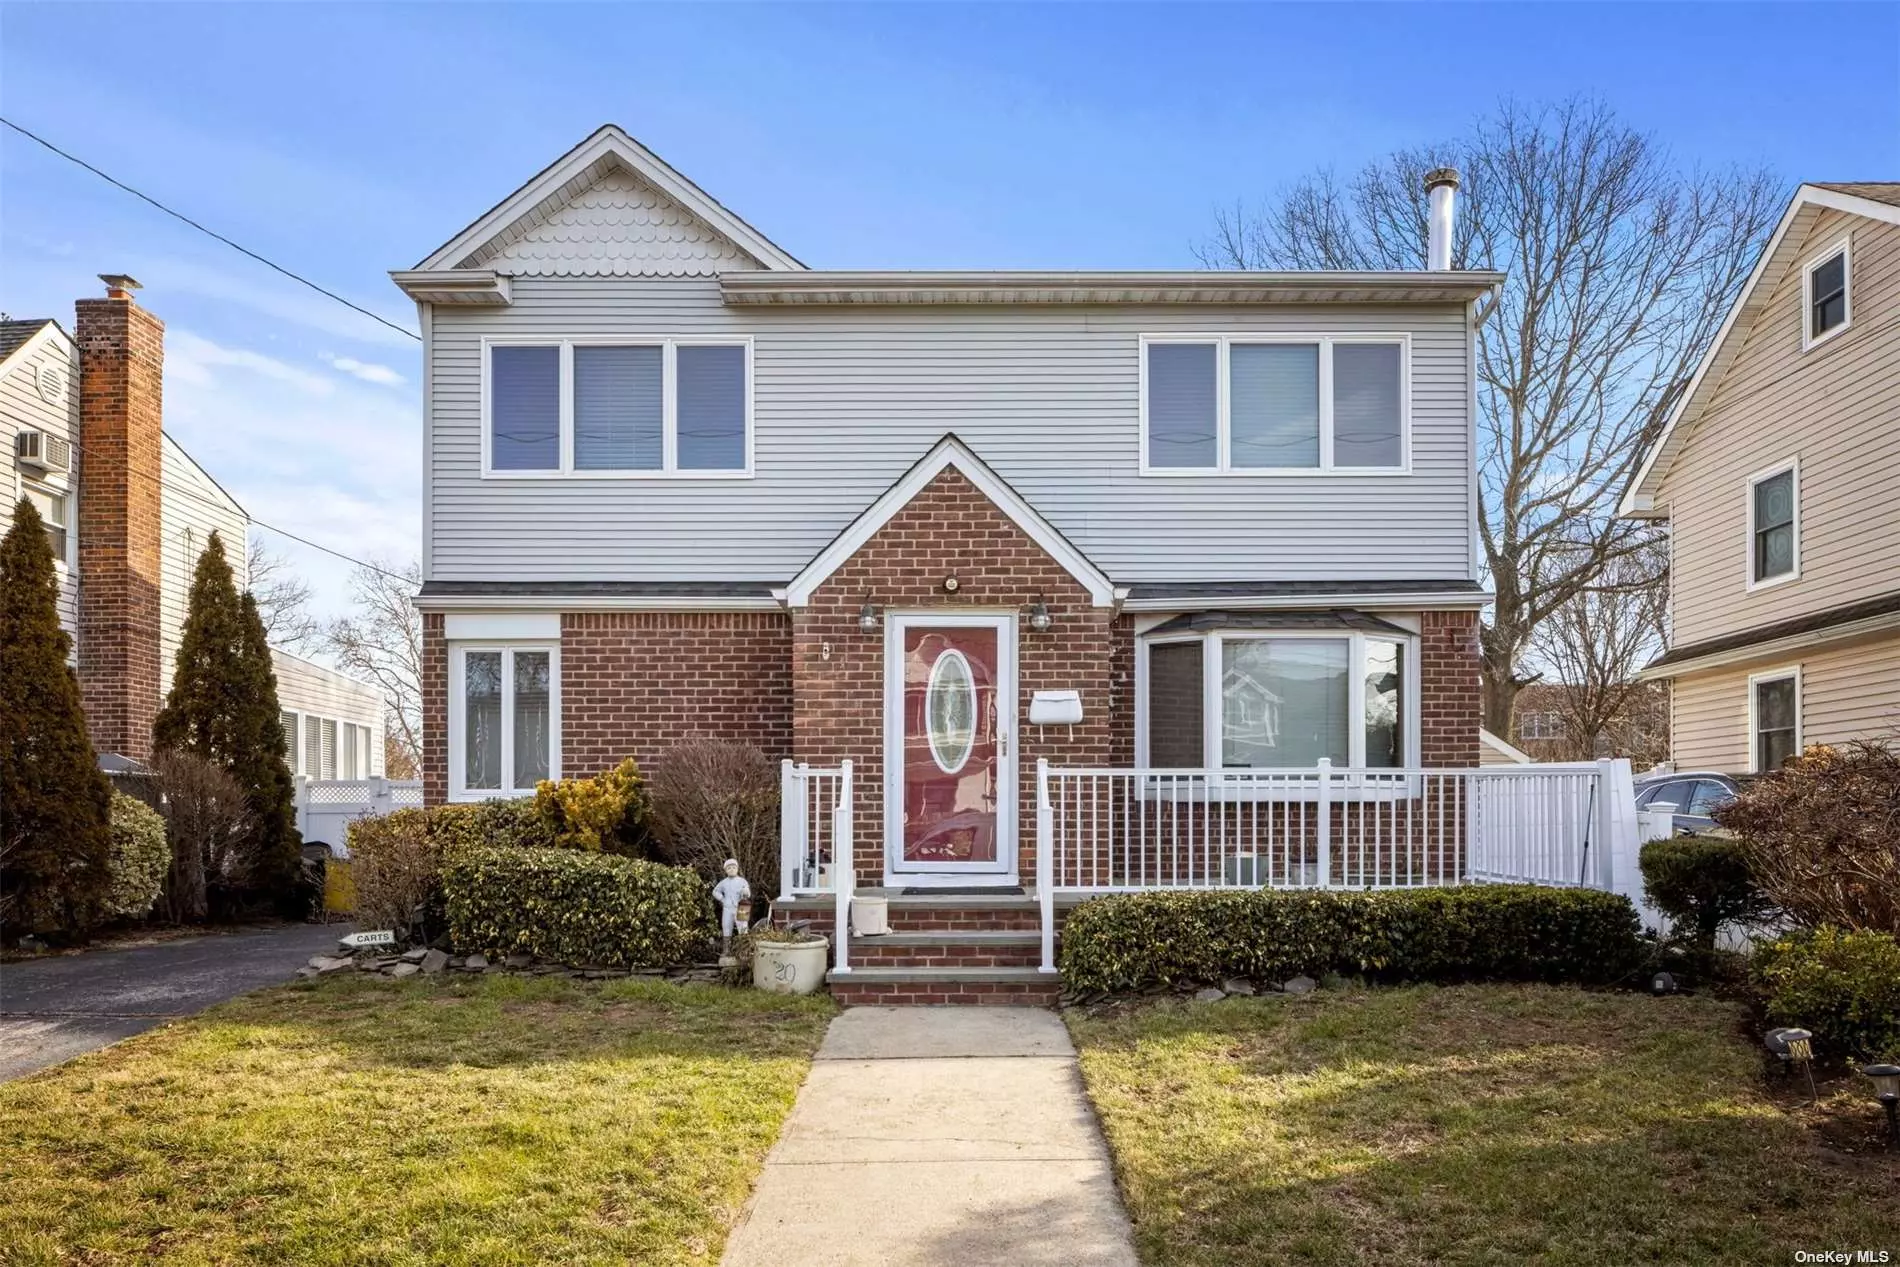 A well kept dormered Colonial with 5 BR and 2 Full baths, Hardwood Fls t/o 1st level.Eik which flows to a large open-concept den w/ plenty of sunlight, most of house is Andersen windows, 3 zone Gas heating, Master BR 15x30, Ultra Bath with Jet Massage, Split level ductless on 1st FL, HW tank 2 years old, All EE star appliances, Double pane windows, Brick Fireplace, Slate porch in front , Concrete patio and pavers in back, treated lumber deck, Bright Basement,  refrigerator is 8 months, Dryer is 3 years, quiet block, school district 14, low taxes, close to homes of worship, shopping, and LIRR. After Star taxes are 14, 128